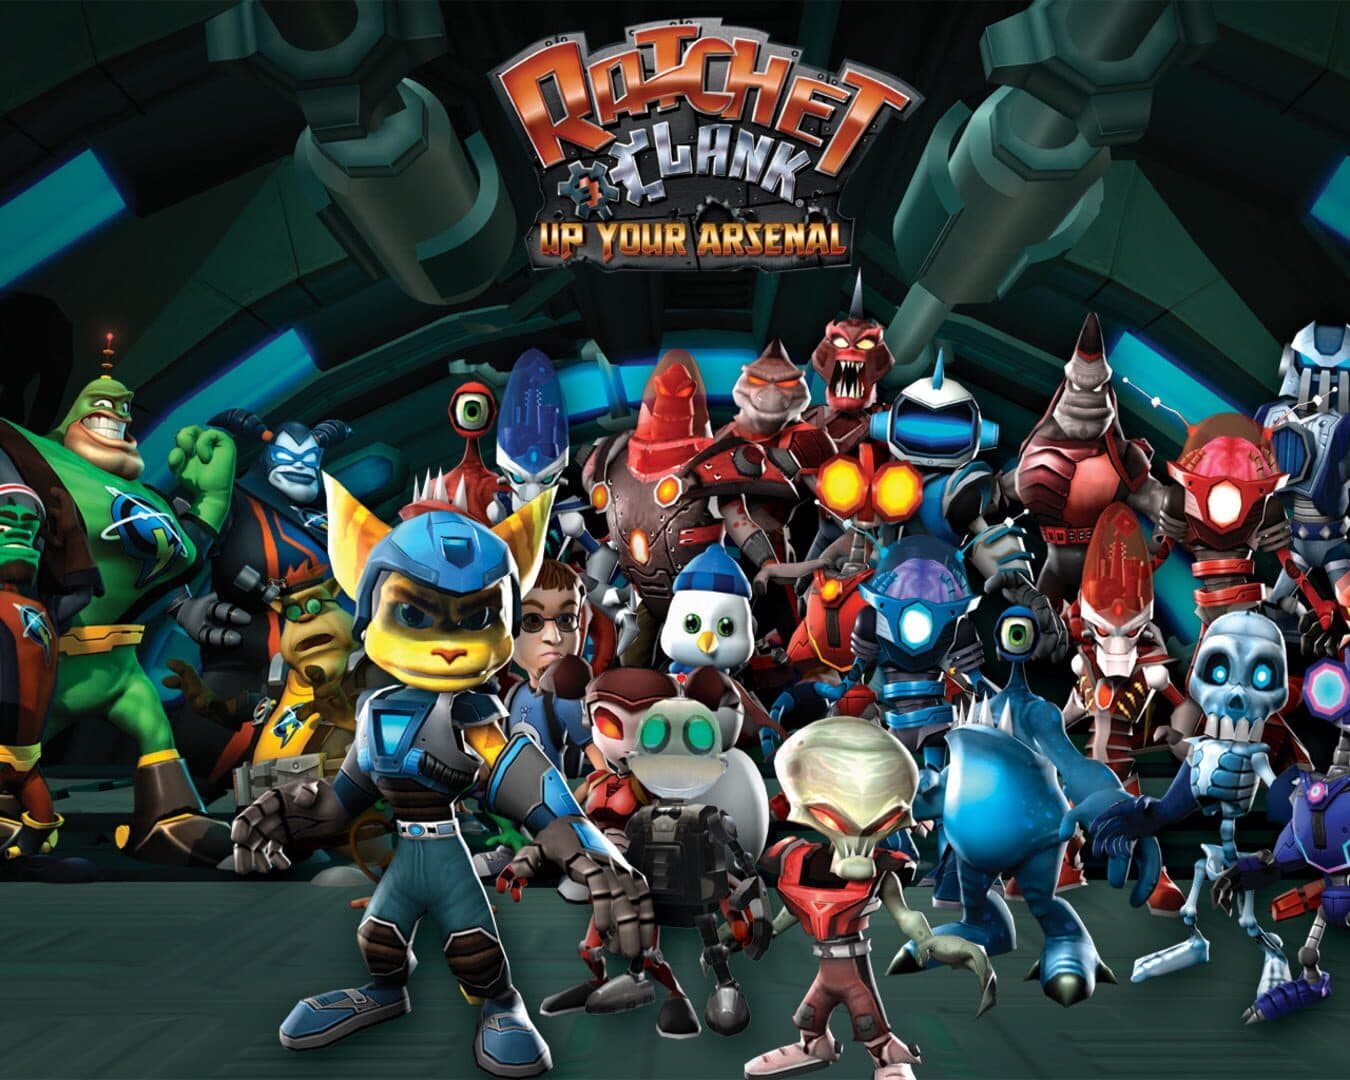 Ratchet & Clank: Up Your Arsenal Image